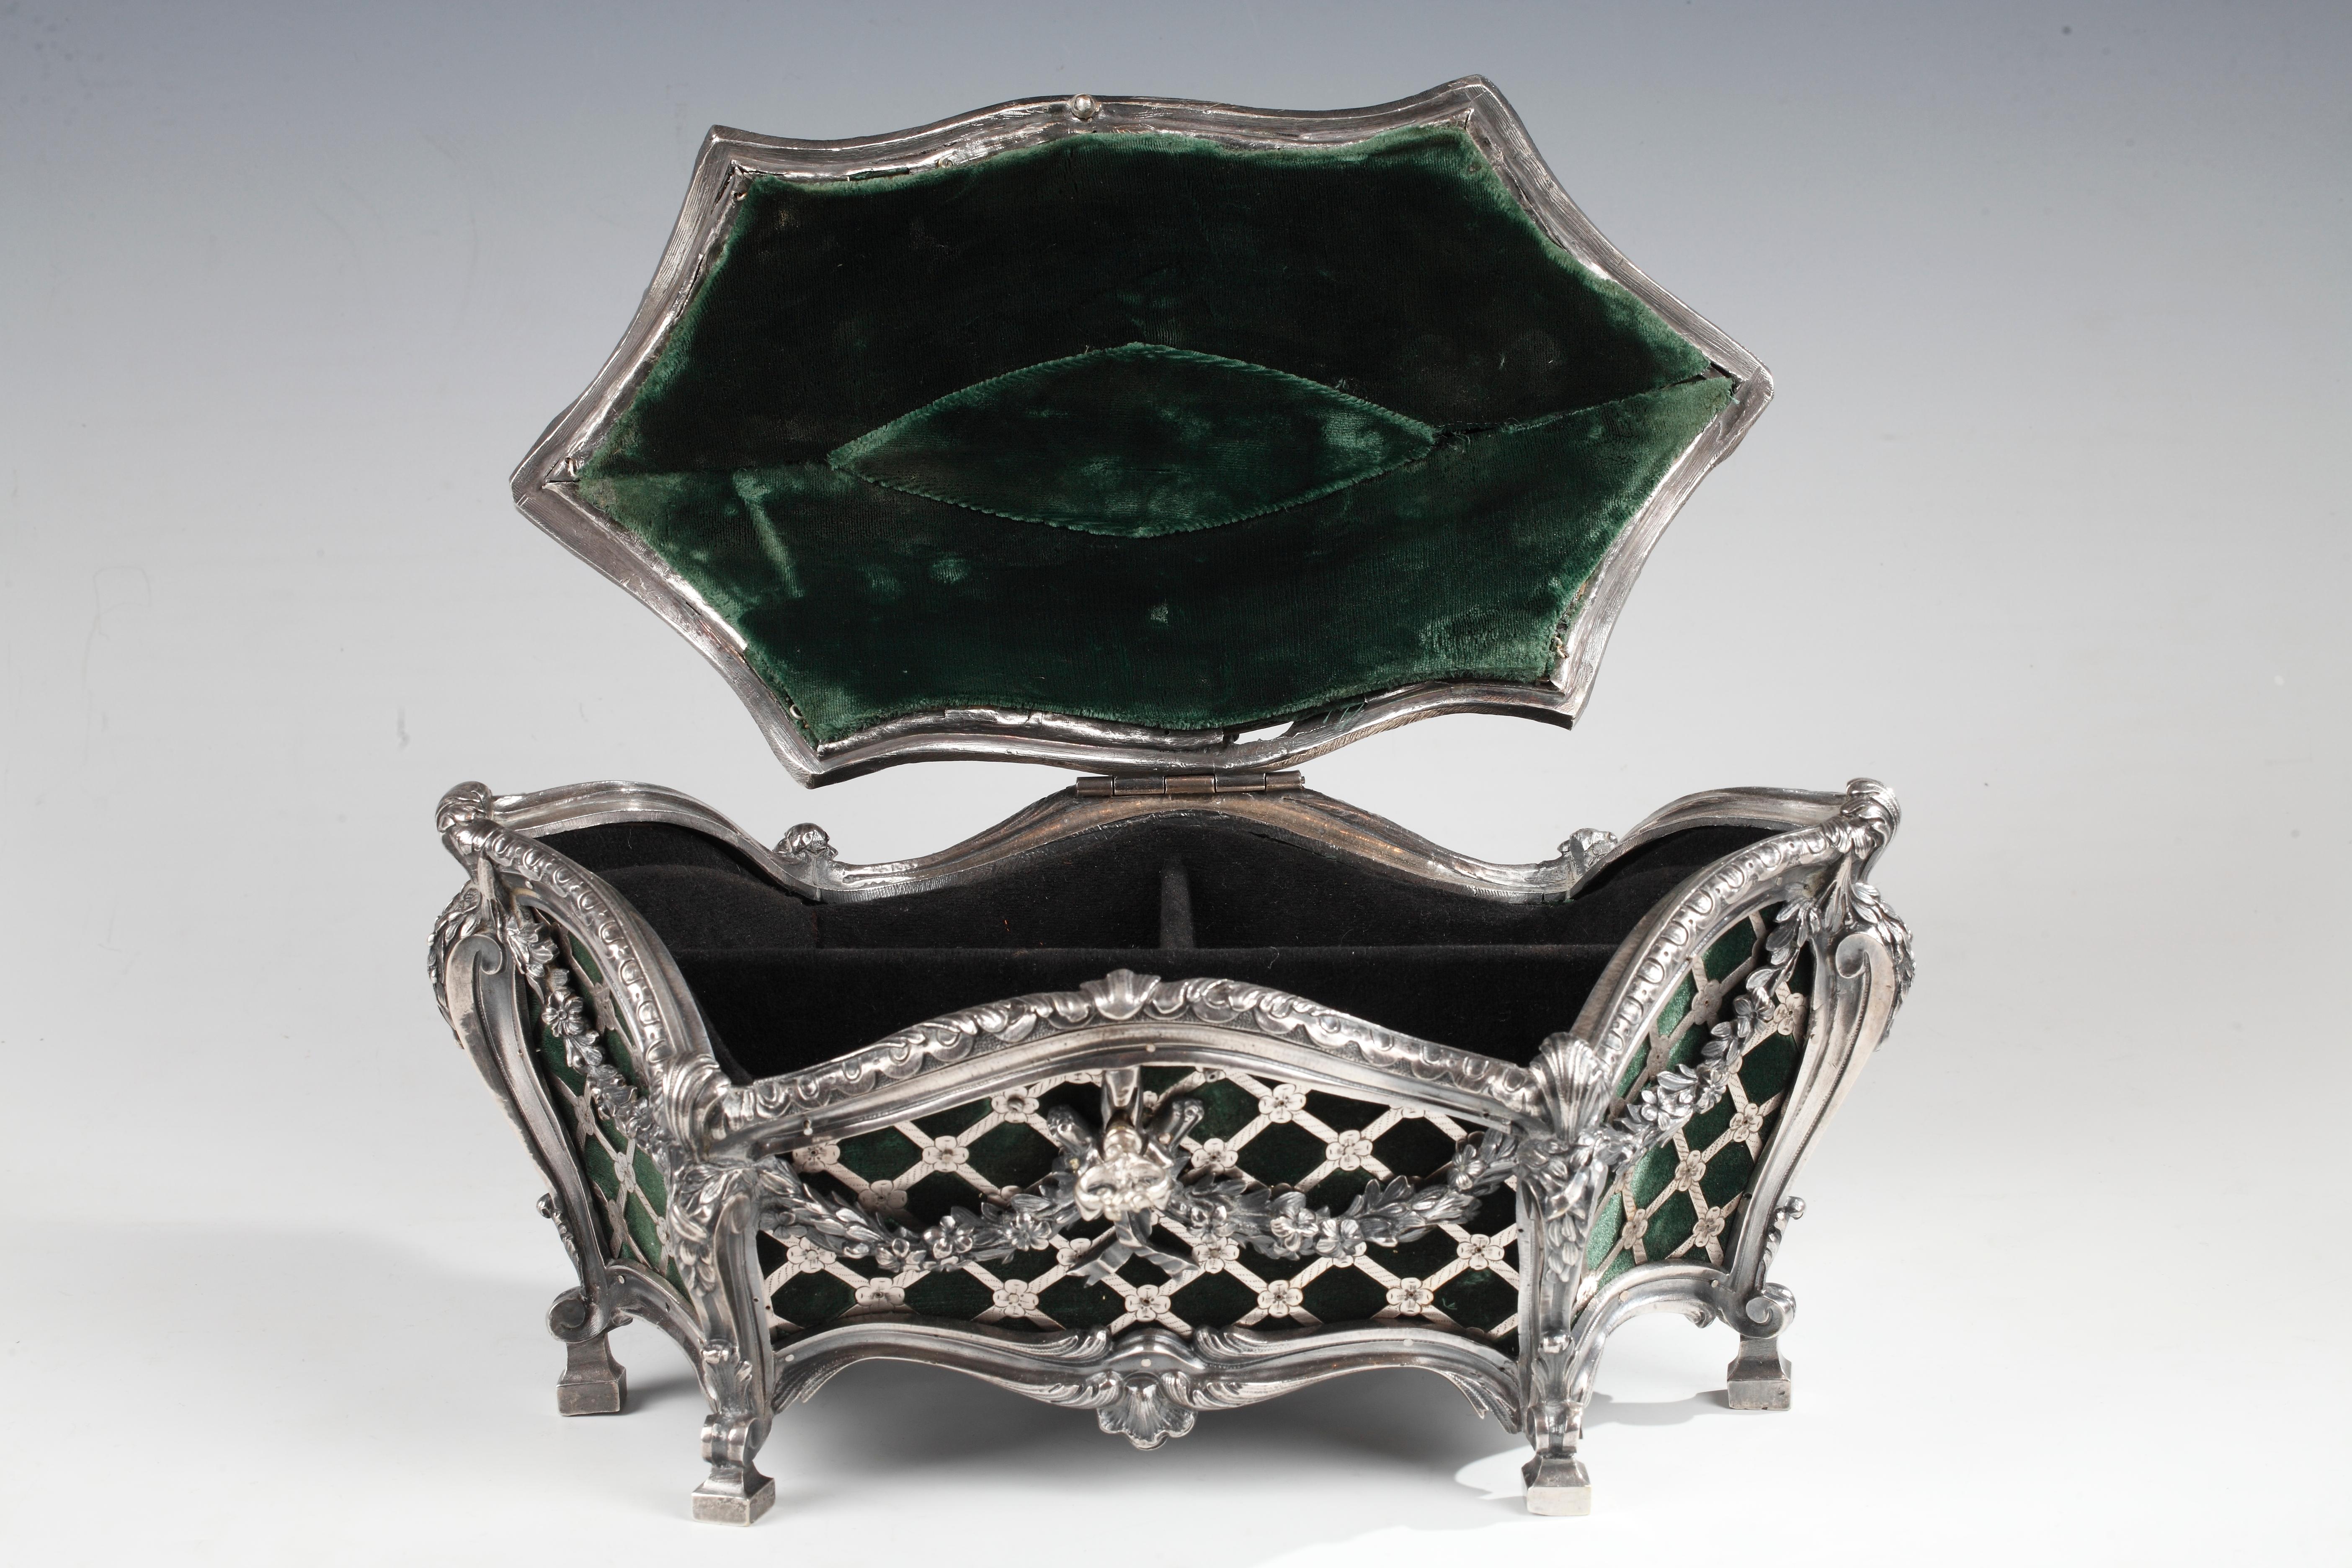 An elegant and asymmetric rocaille style silvered bronze coffer attributed to Tahan, and decorated with openwork flowery trellis upon a green silk velvet. Fine ornamentation of flower garlands and scrolls.
The coffer has two black coated